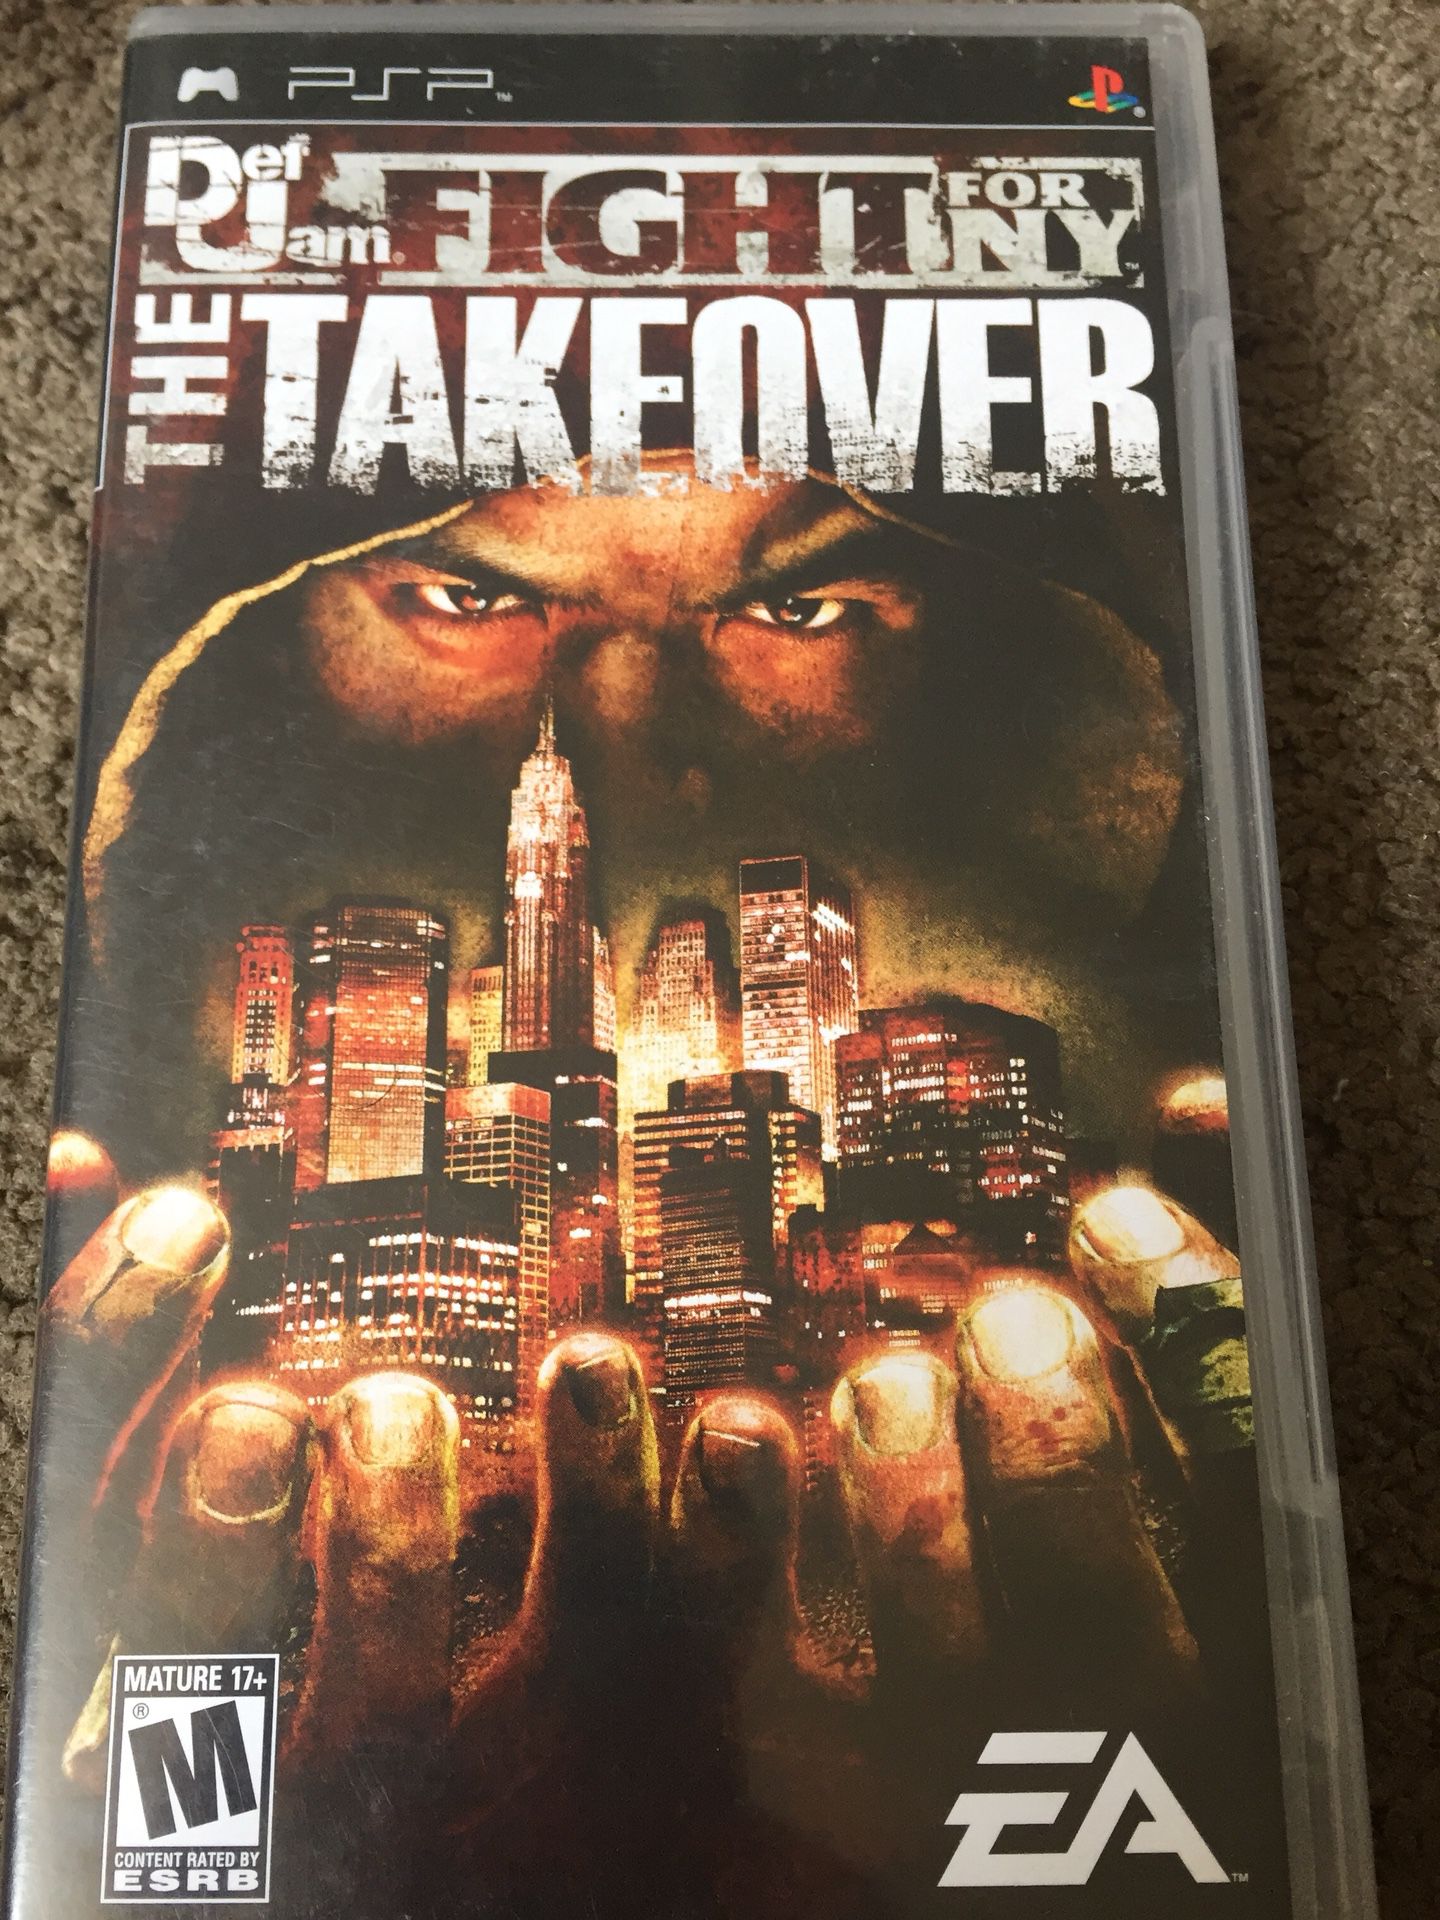 PSP UMD GAMES Def Jam Fight For NY The Takeover, Video Gaming